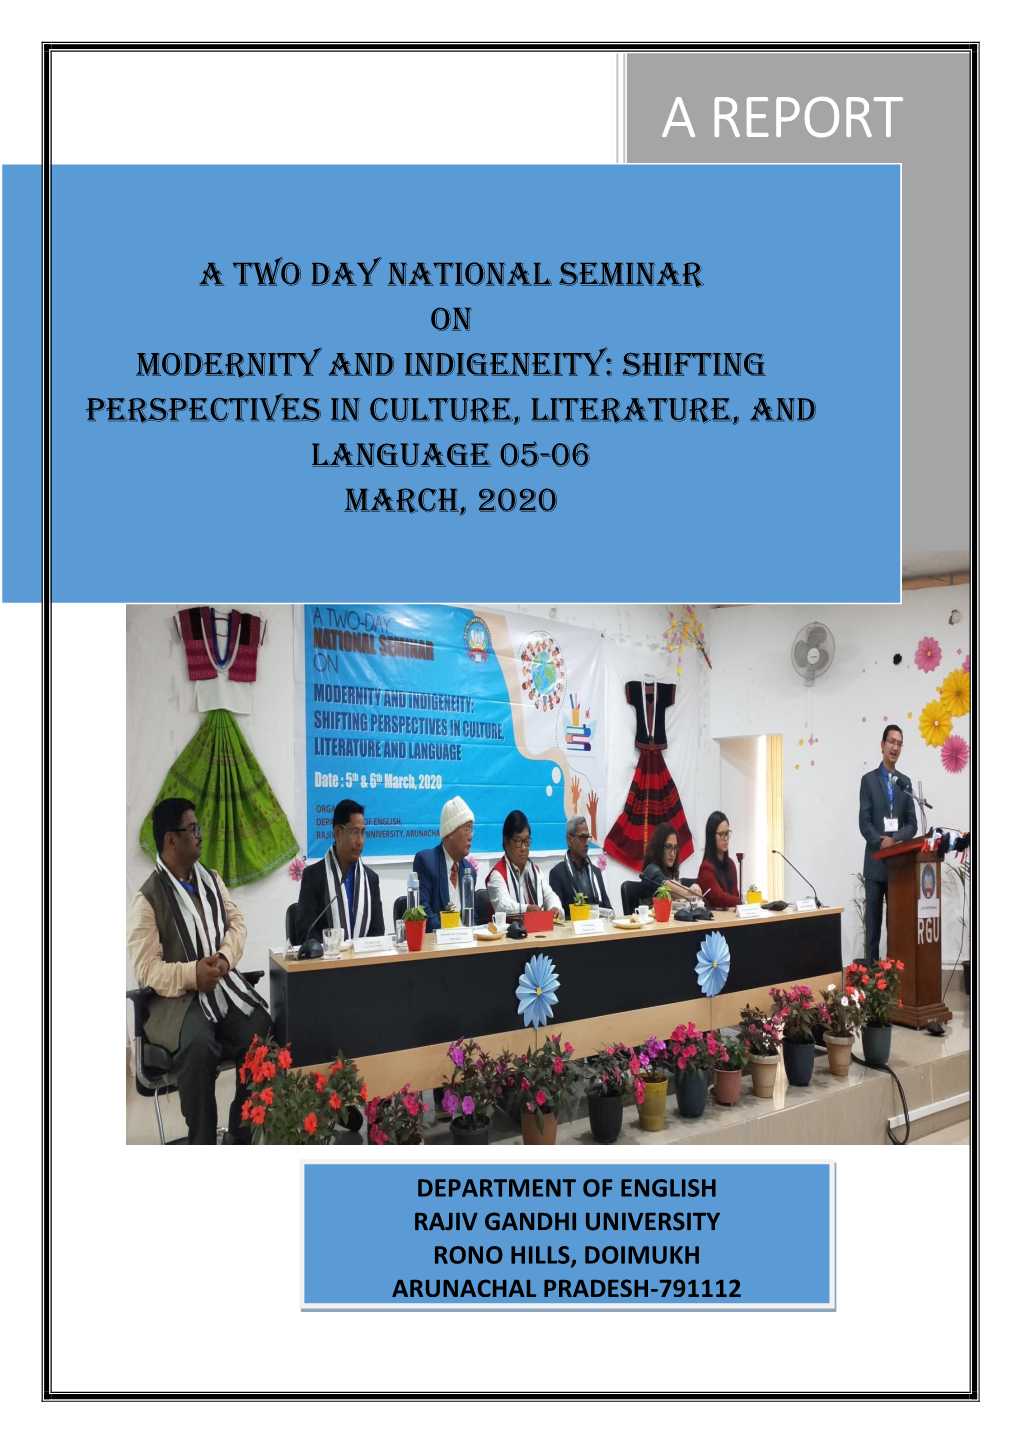 Report on 2-Day National Seminar on Modernity and Indigeneity